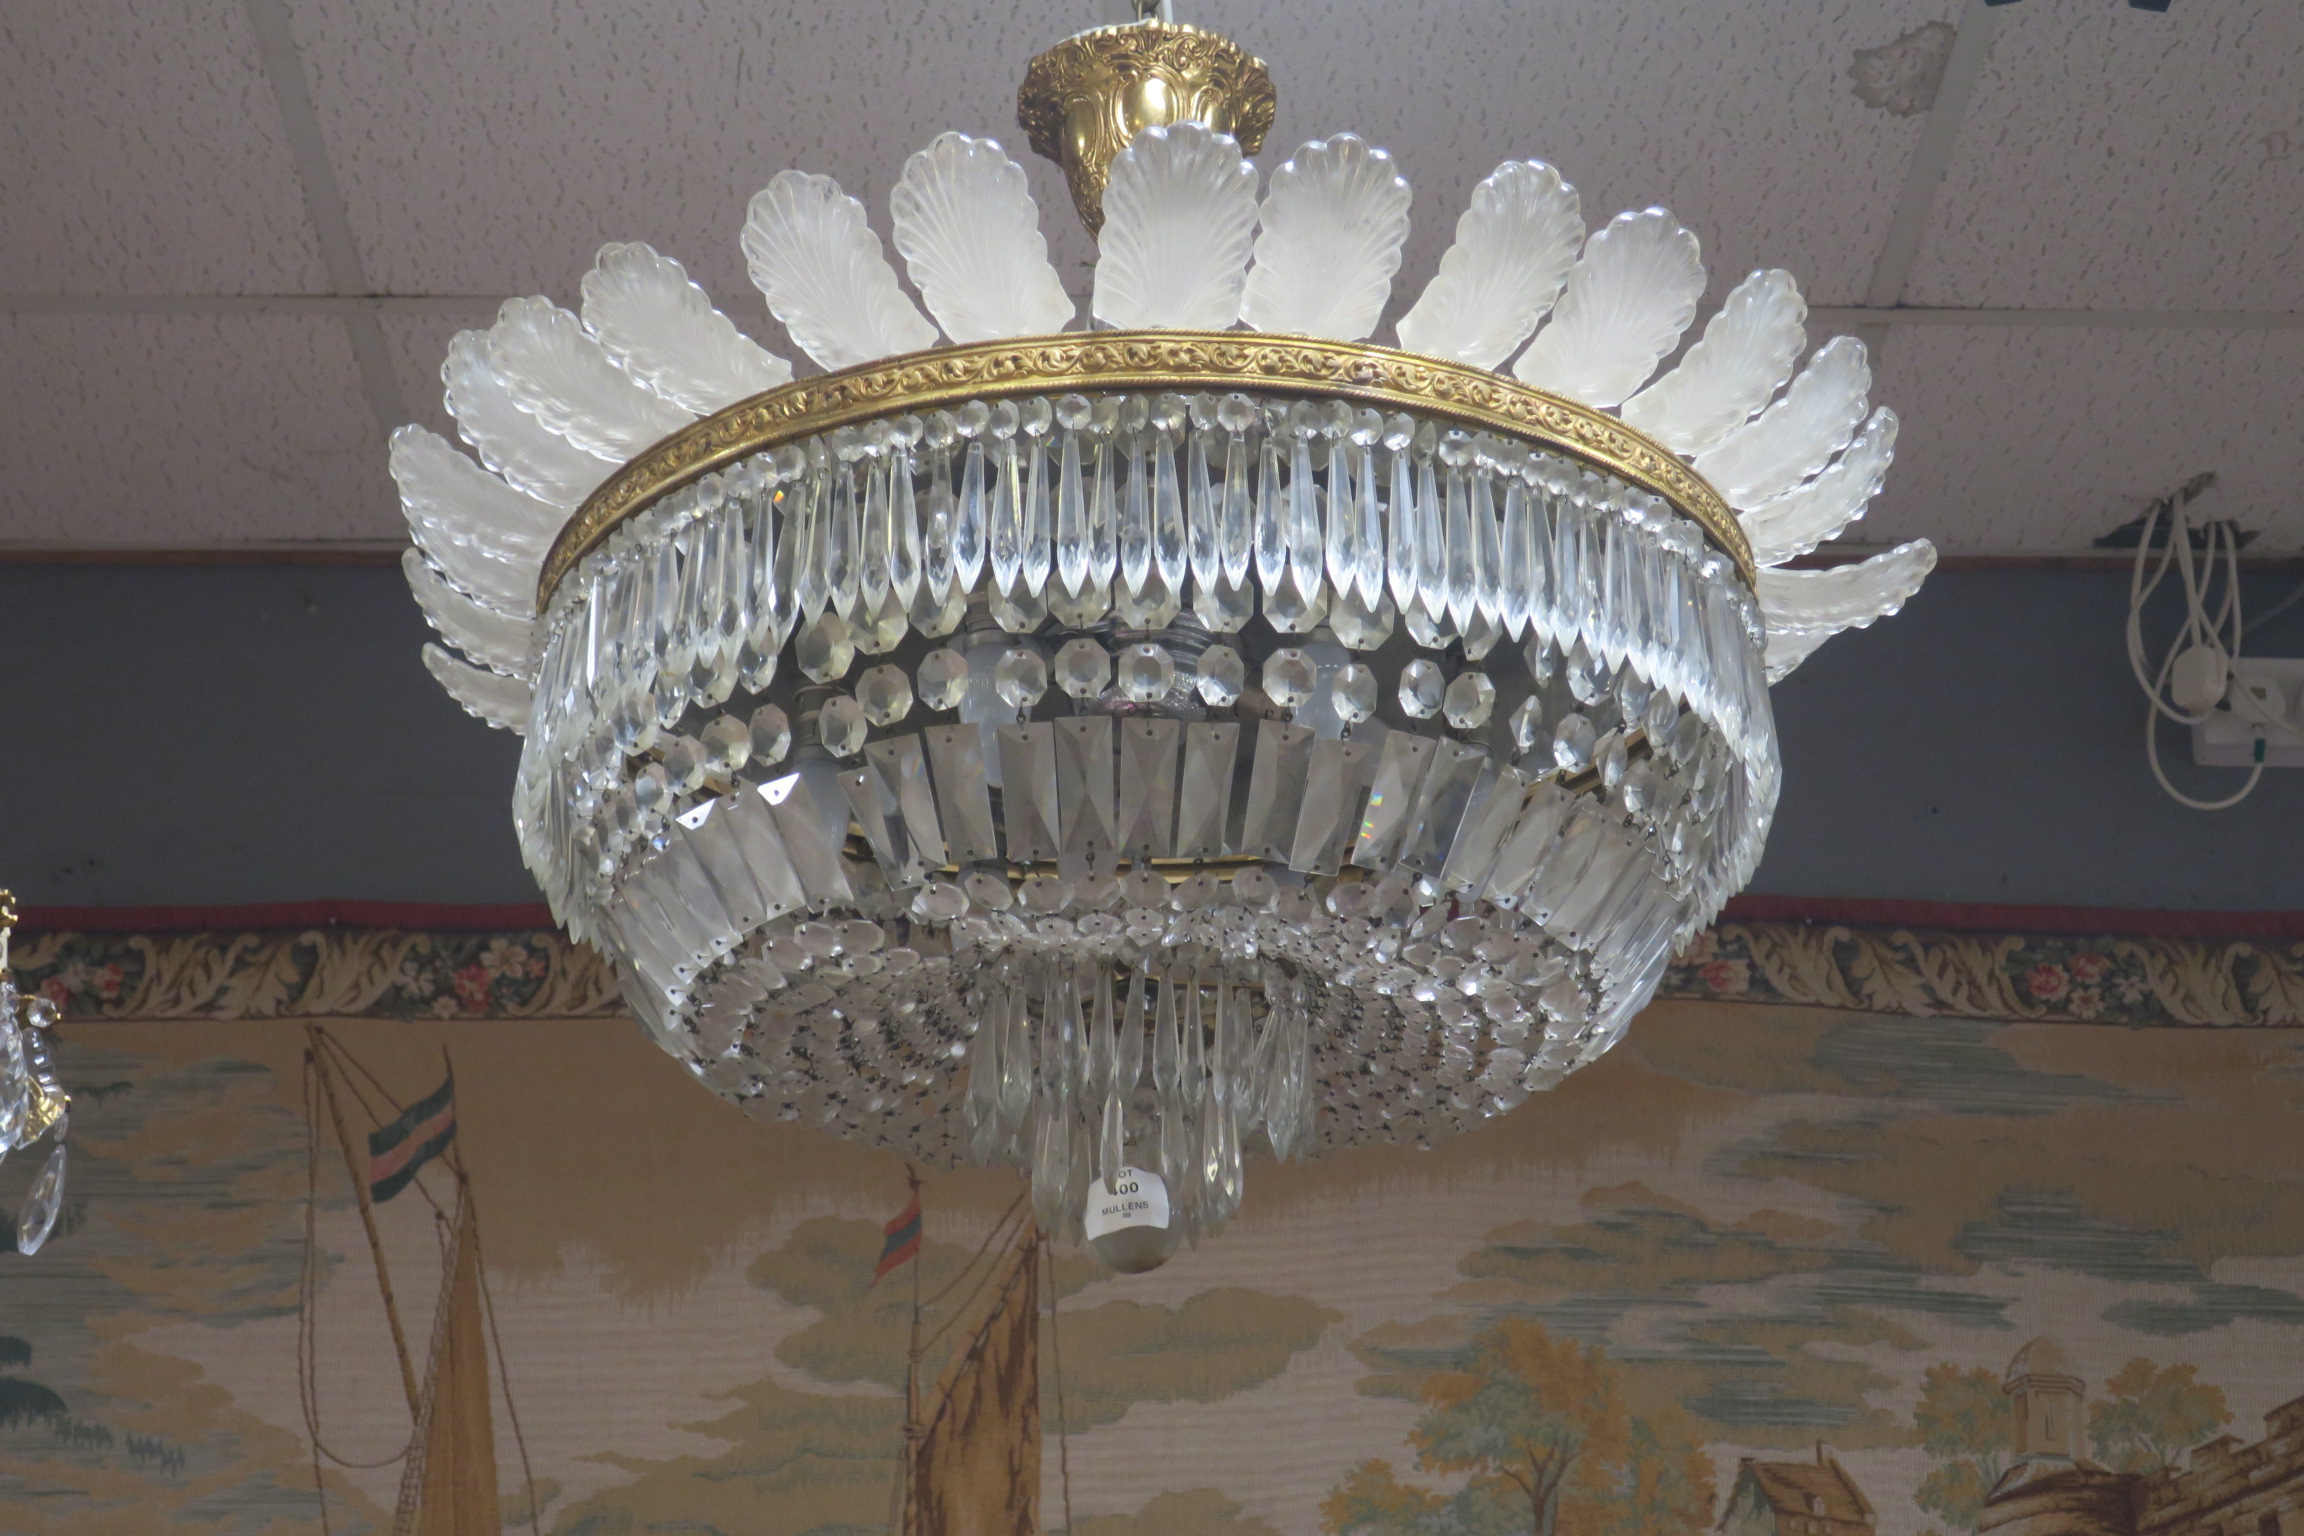 A FINE CONTINENTAL GILT BRASS AND CUT GLASS BASKET CHANDELIER hung with faceted chains and drops